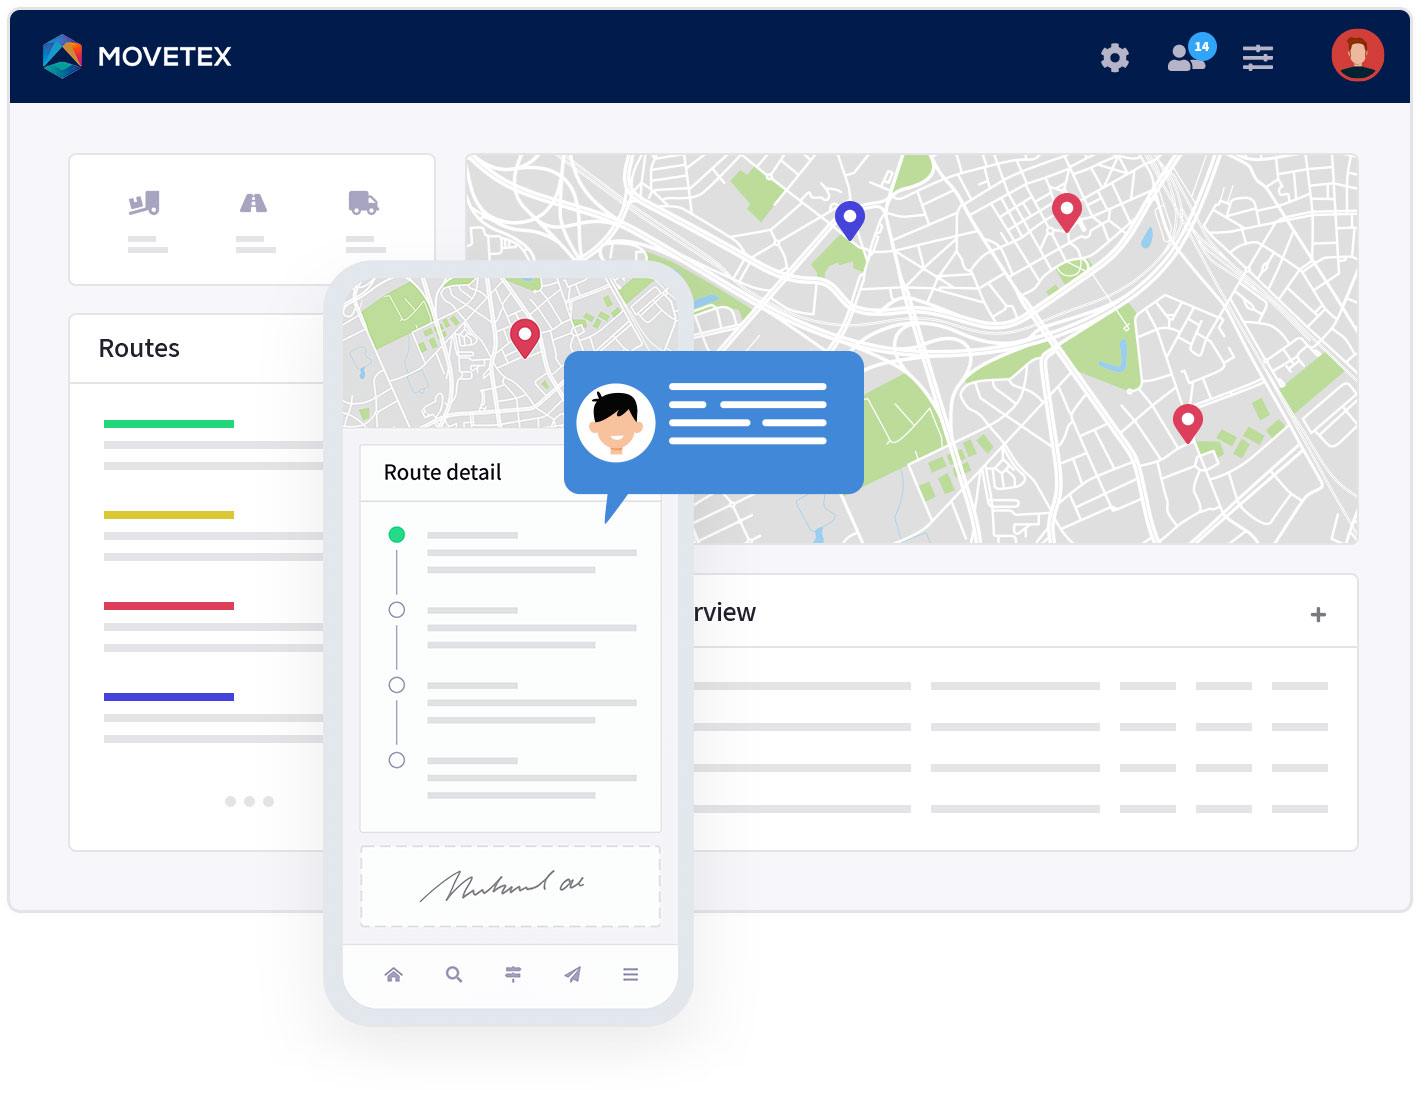 Movetex planning software